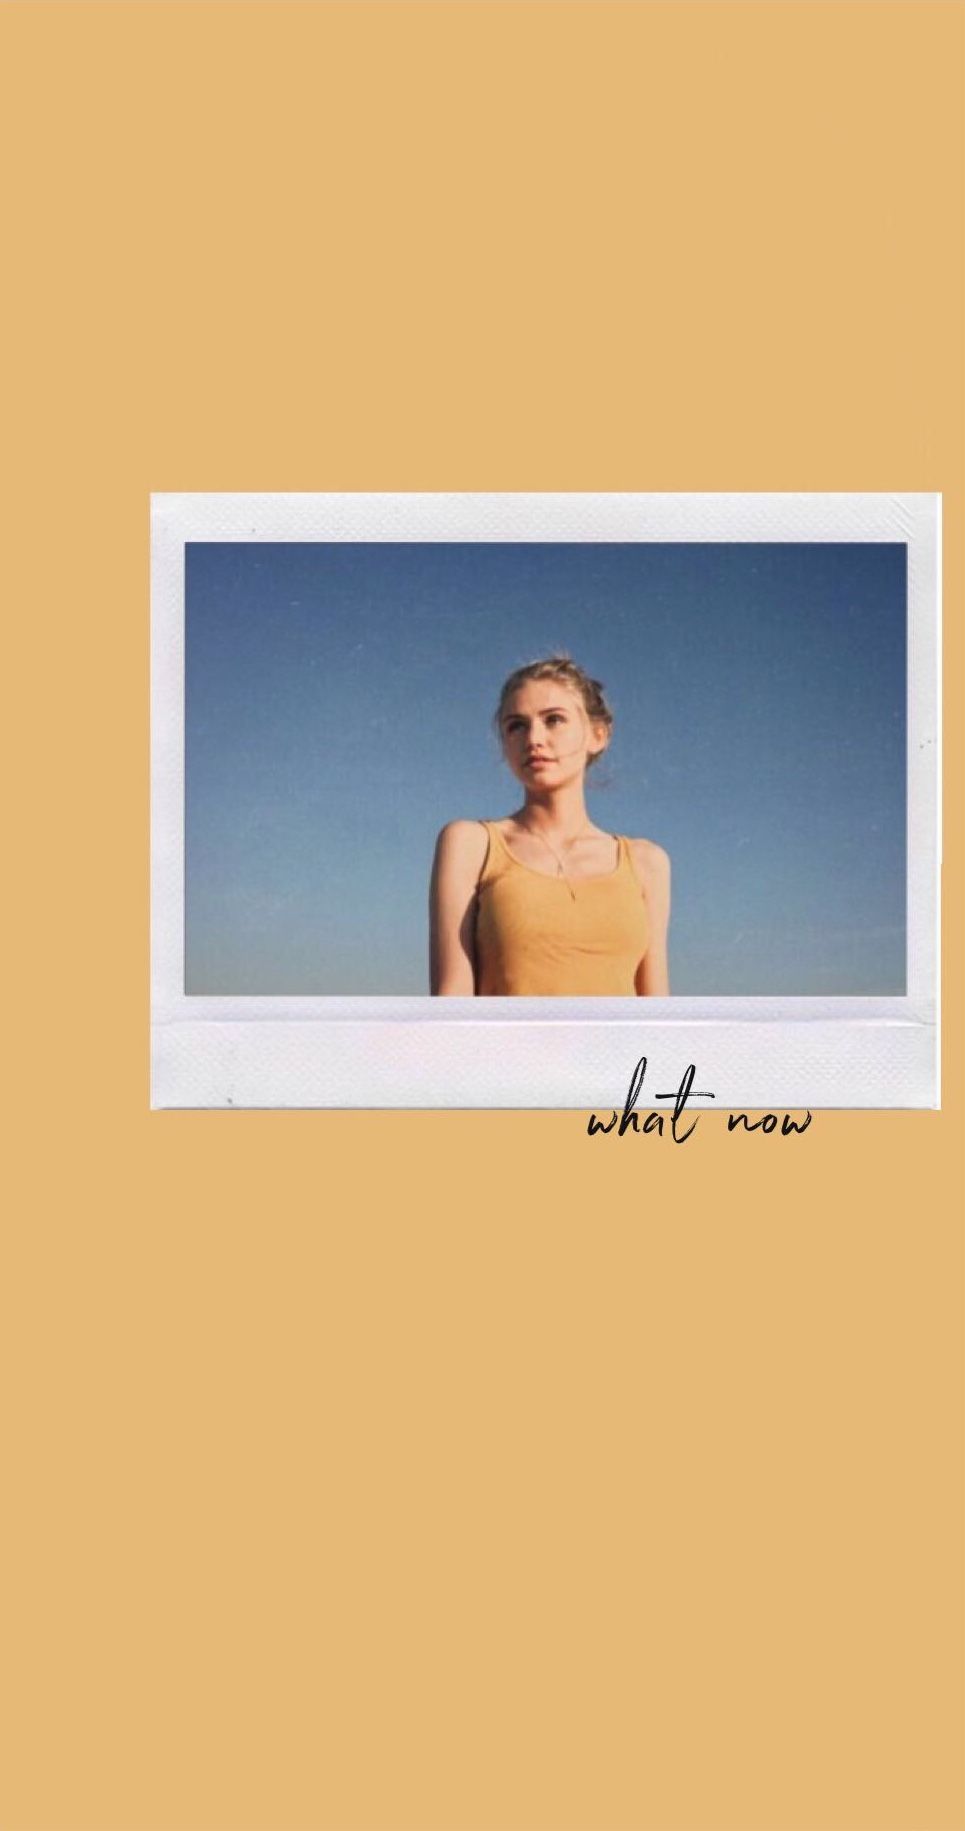 What now by person - Polaroid